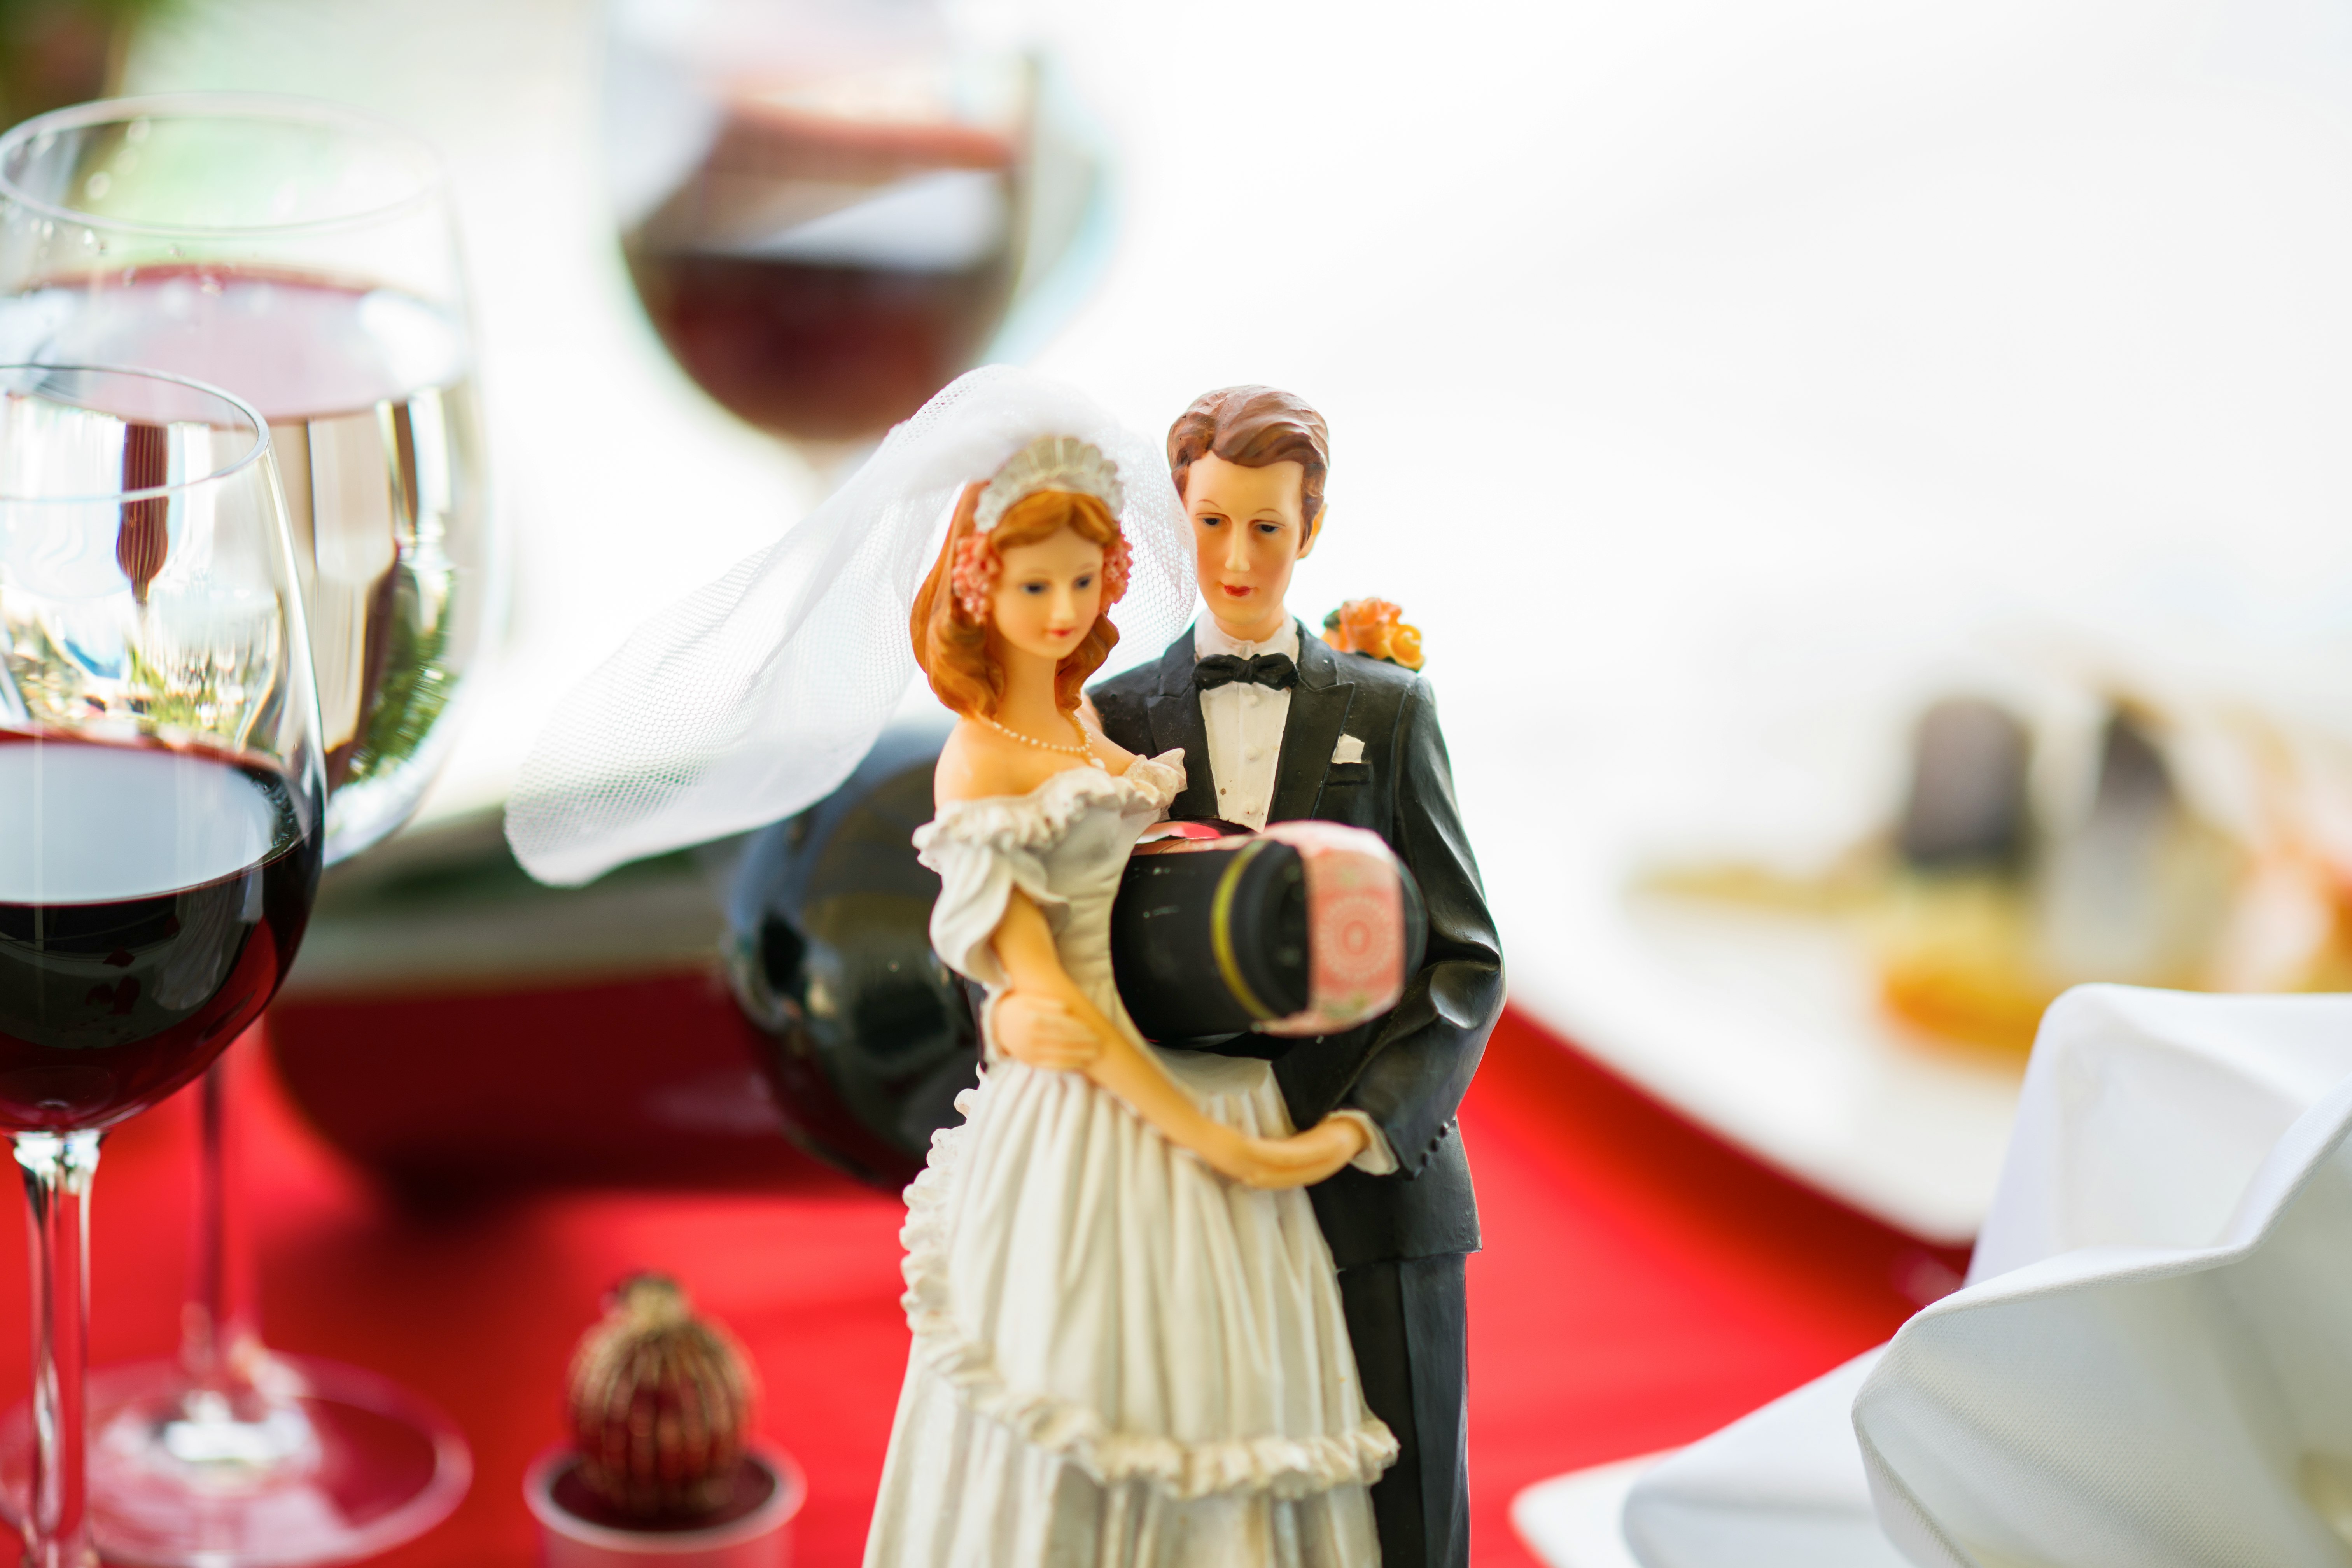 woman in white dress holding man in black suit figurine